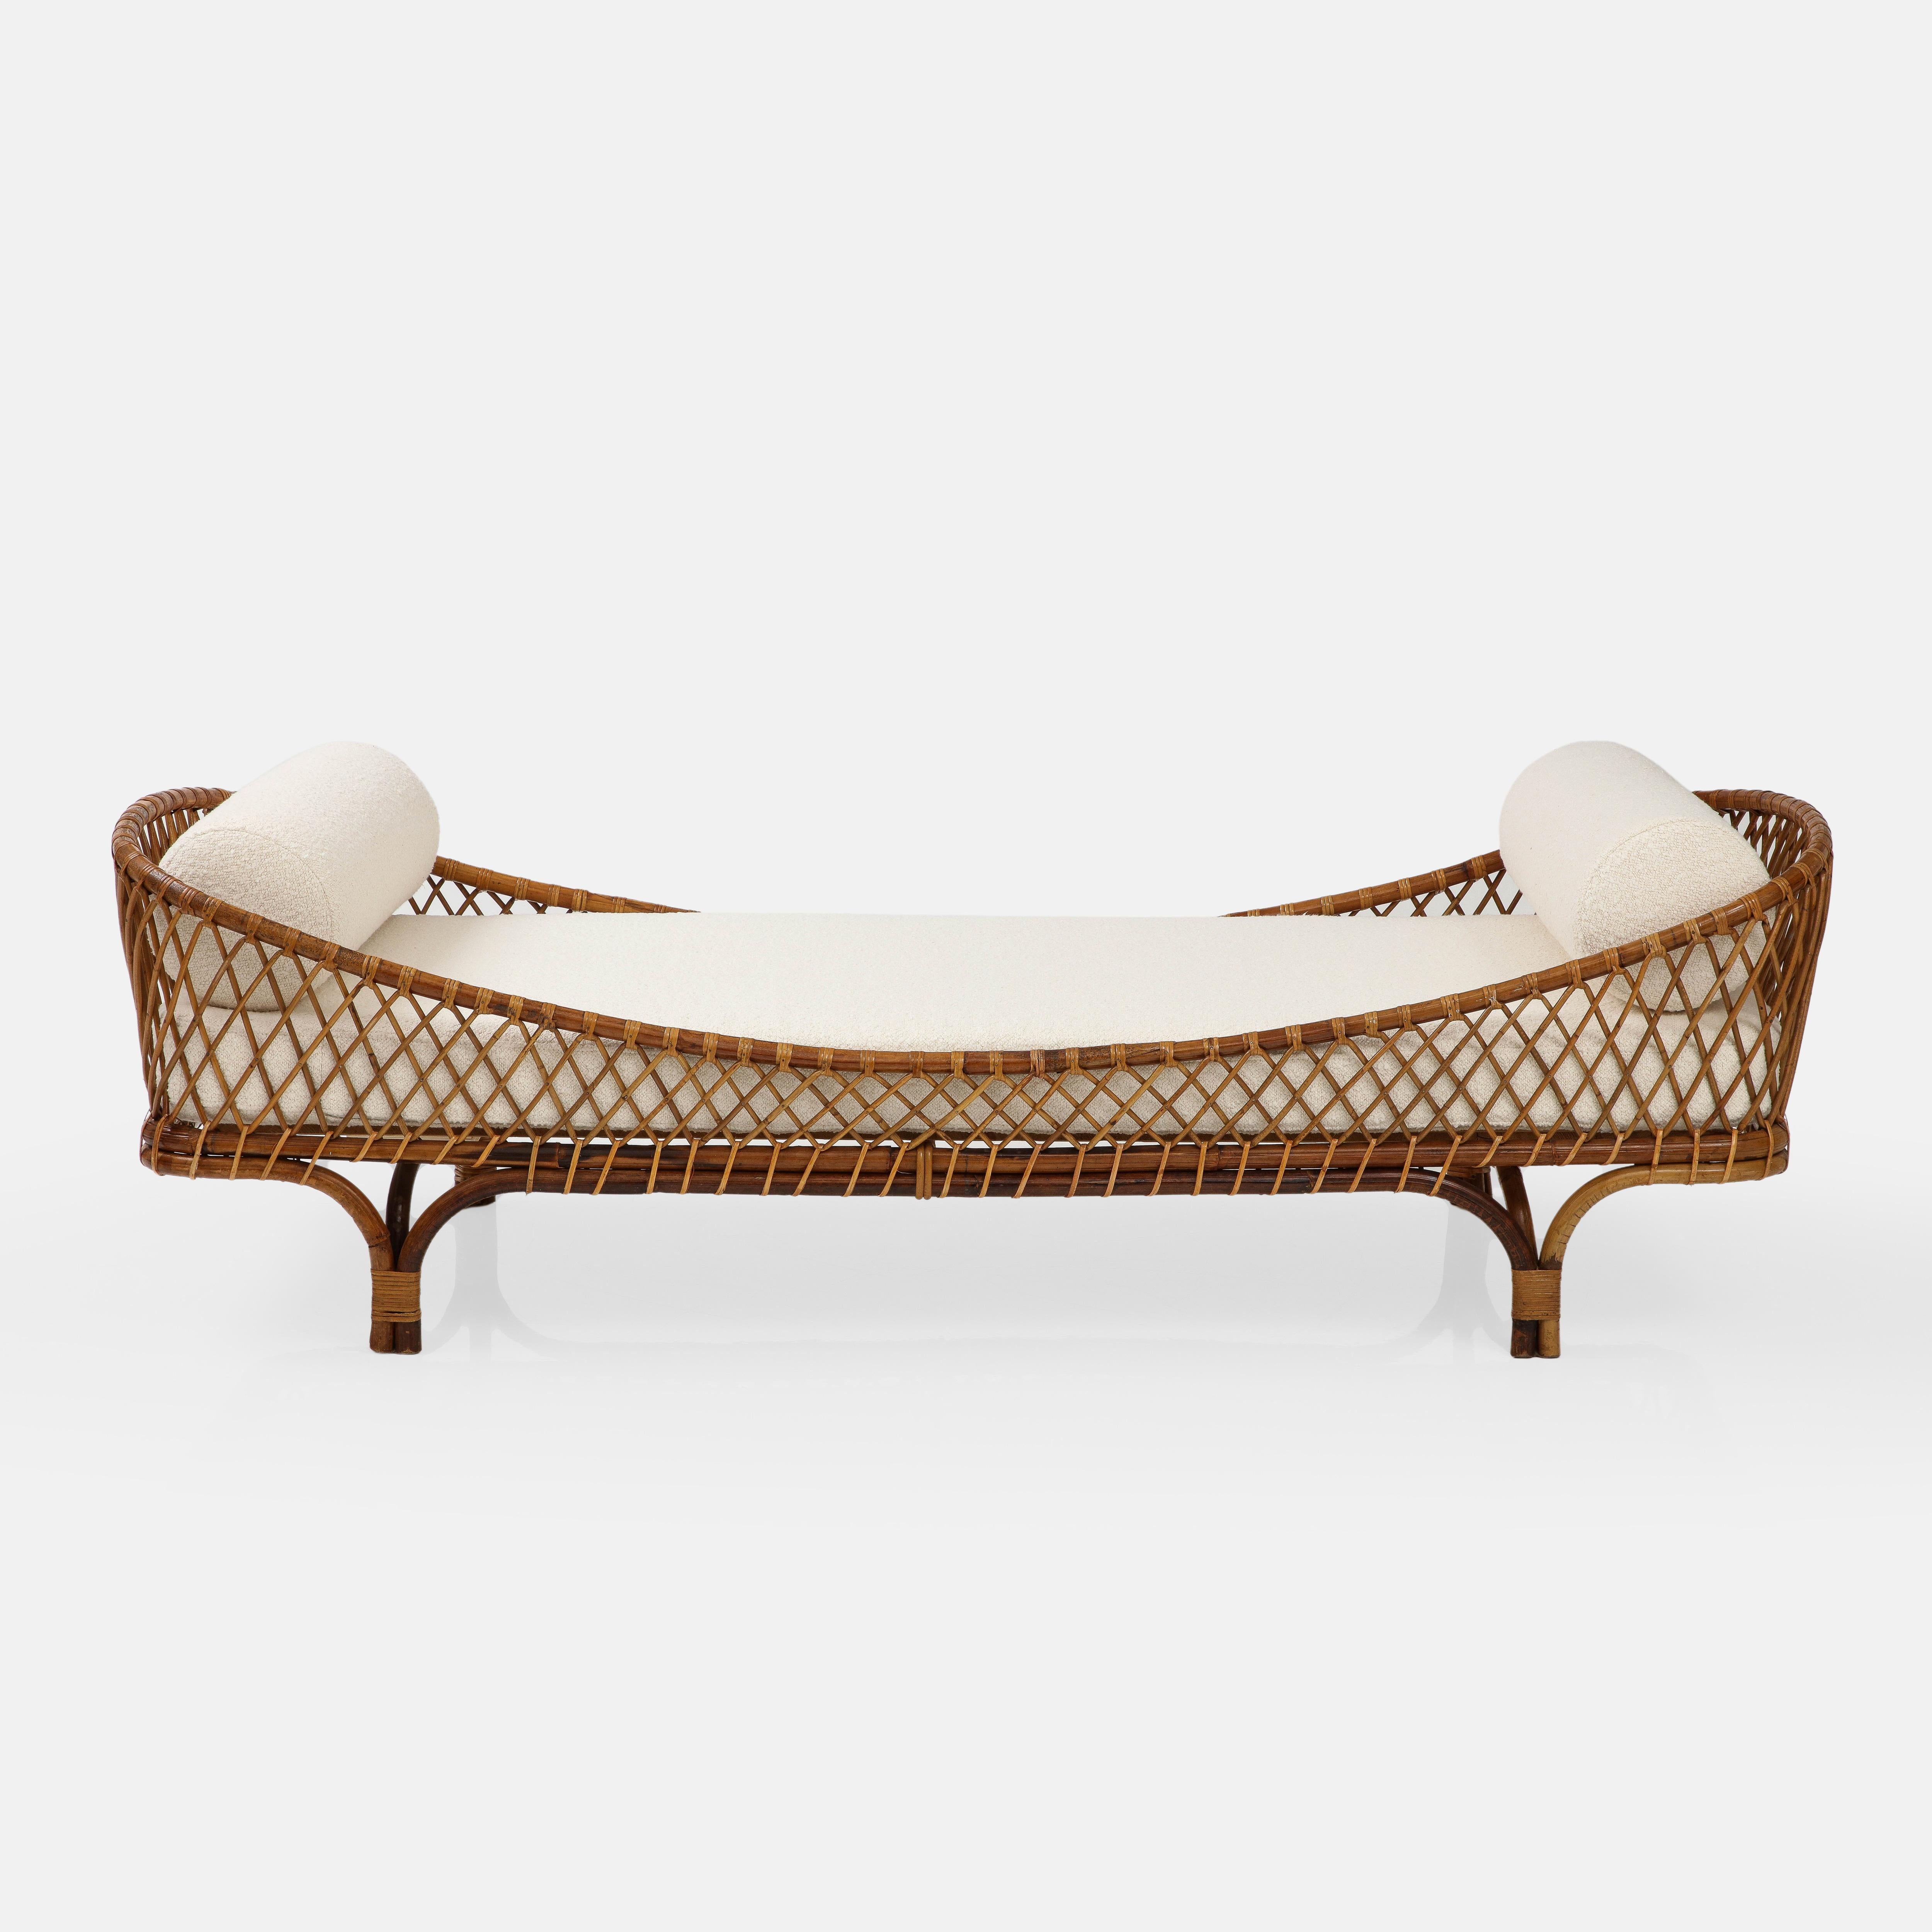 Italian Rare Bonacina Rattan Daybed in Ivory Bouclé with Custom Mattress, Italy, 1960s For Sale